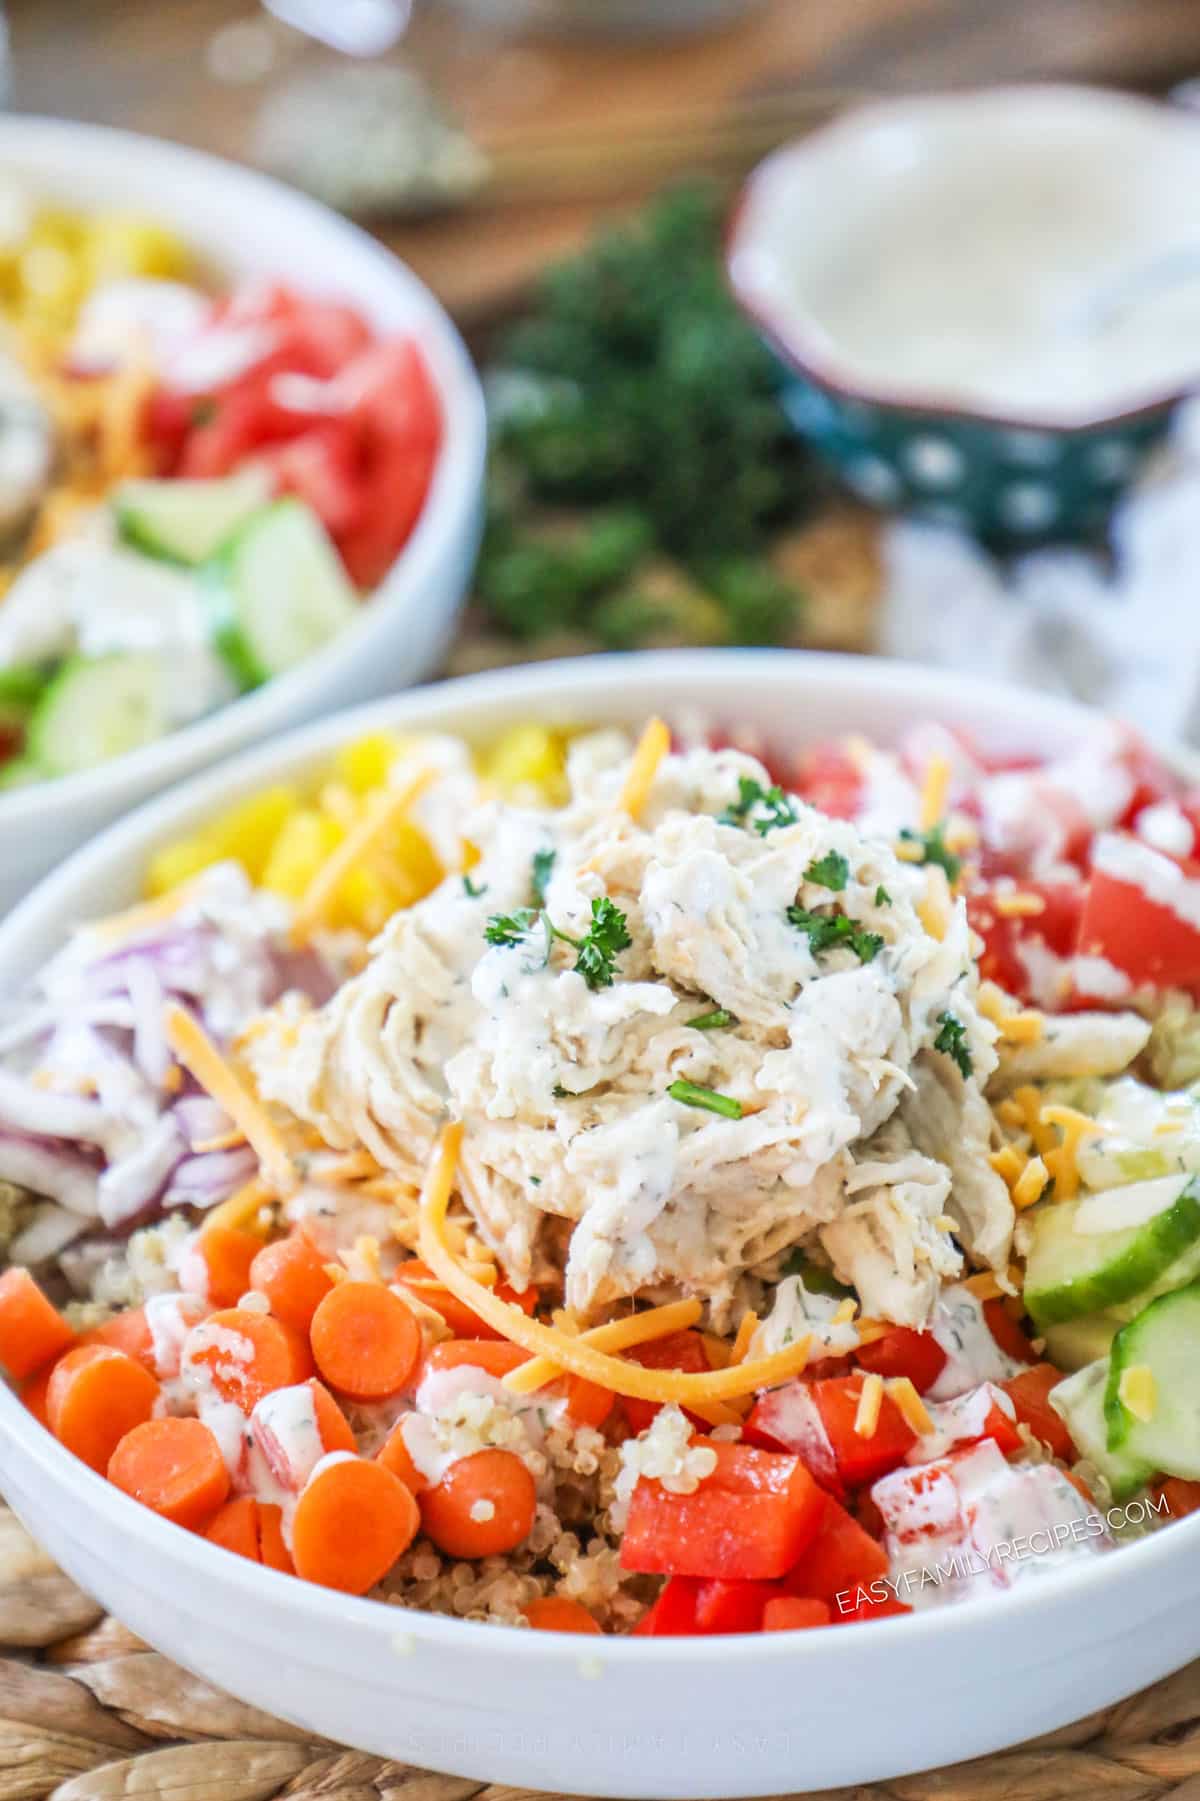 Creamy Ranch Chicken made in the slow cooker piled on top of a colorful salad